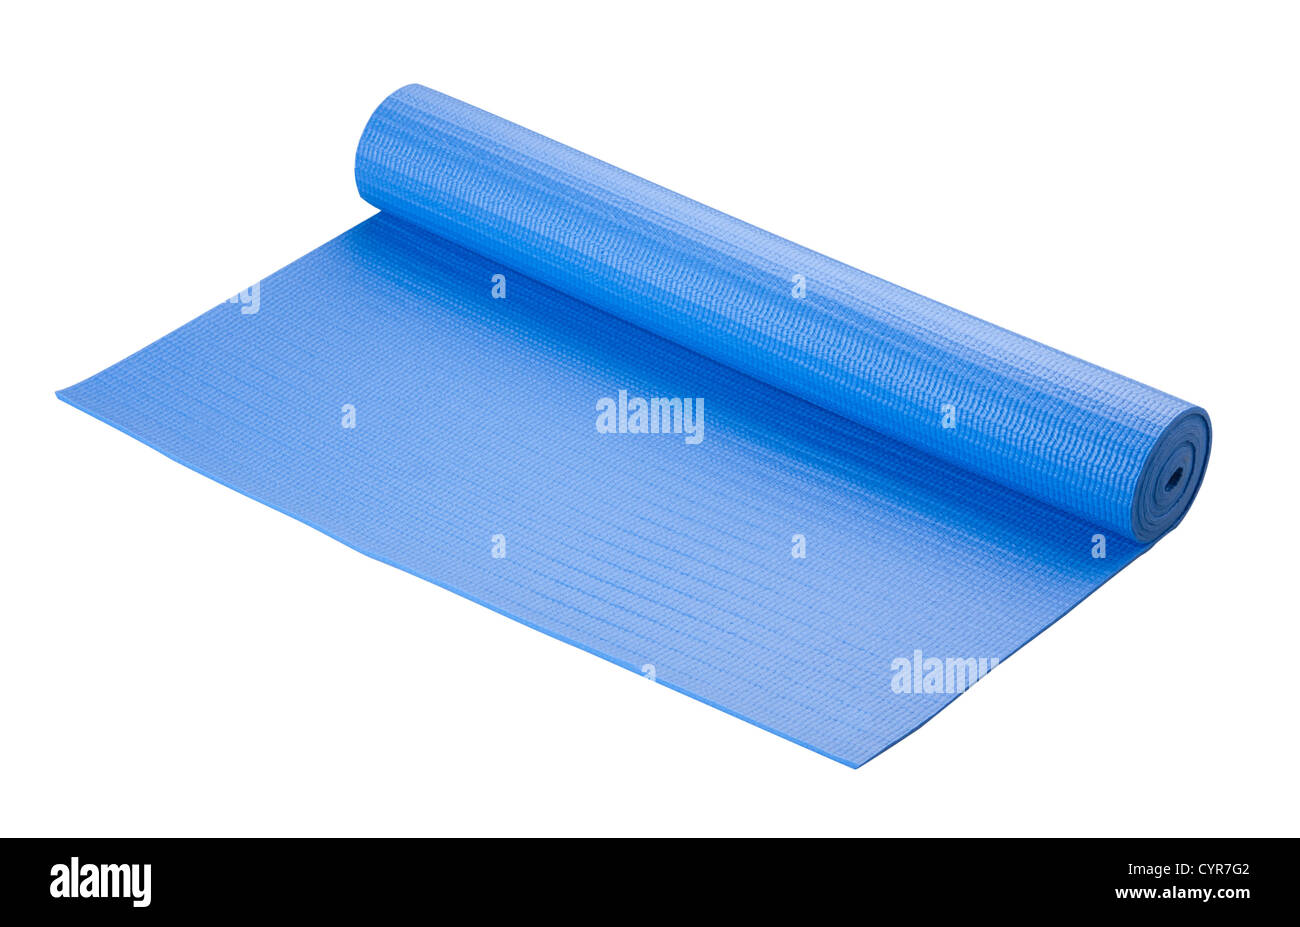 Yoga mat soft and great tool for your exercise or relaxation Stock Photo